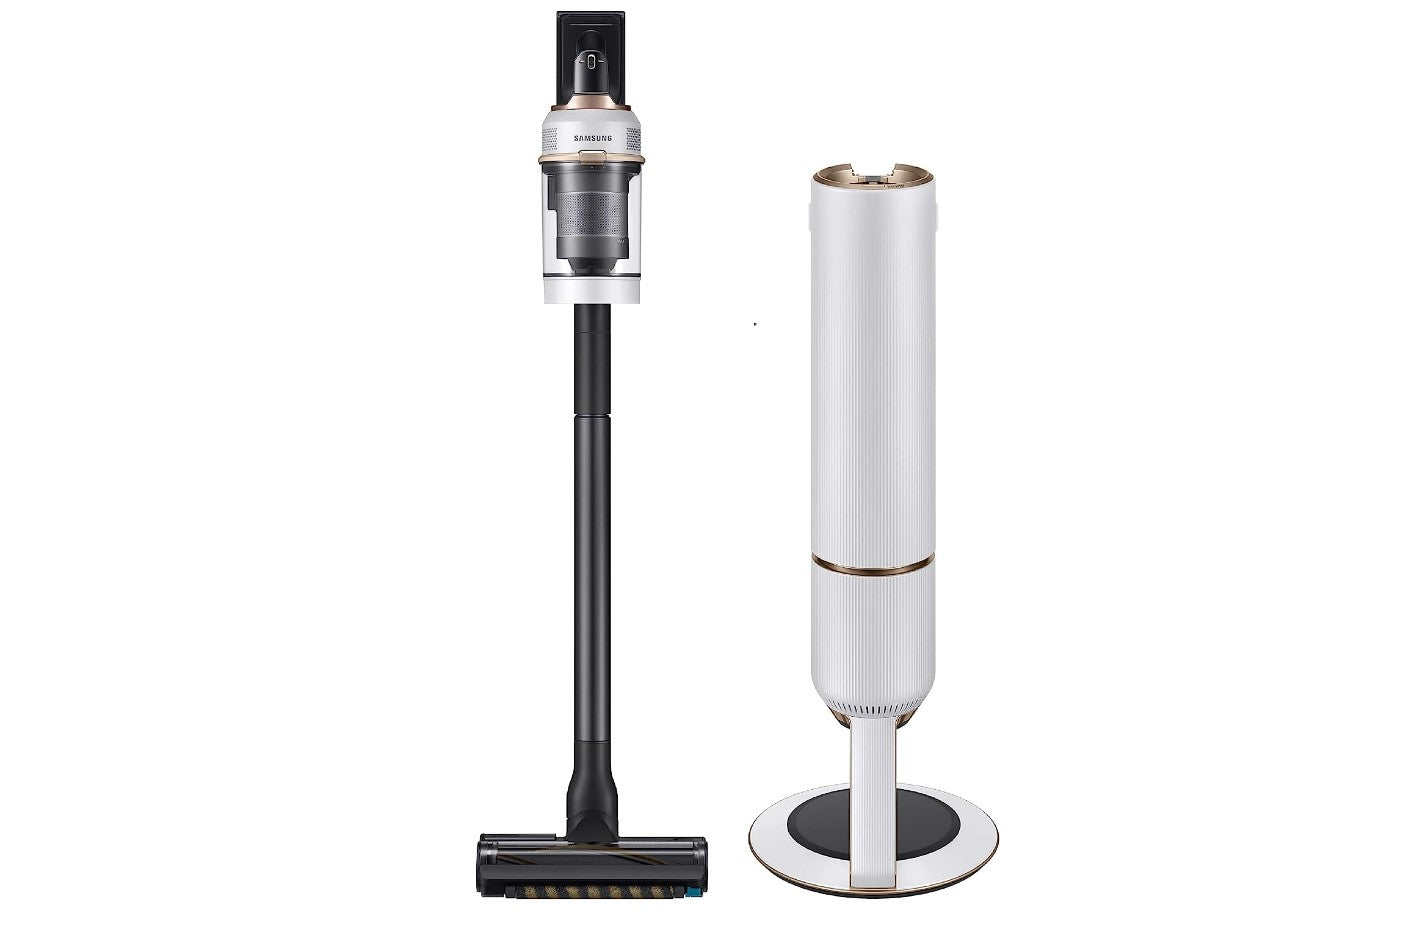 Samsung VS20A95923W/AA-RB Bespoke Jet Cordless Stick Vacuum with Clean Station Misty White - Certified Refurbished